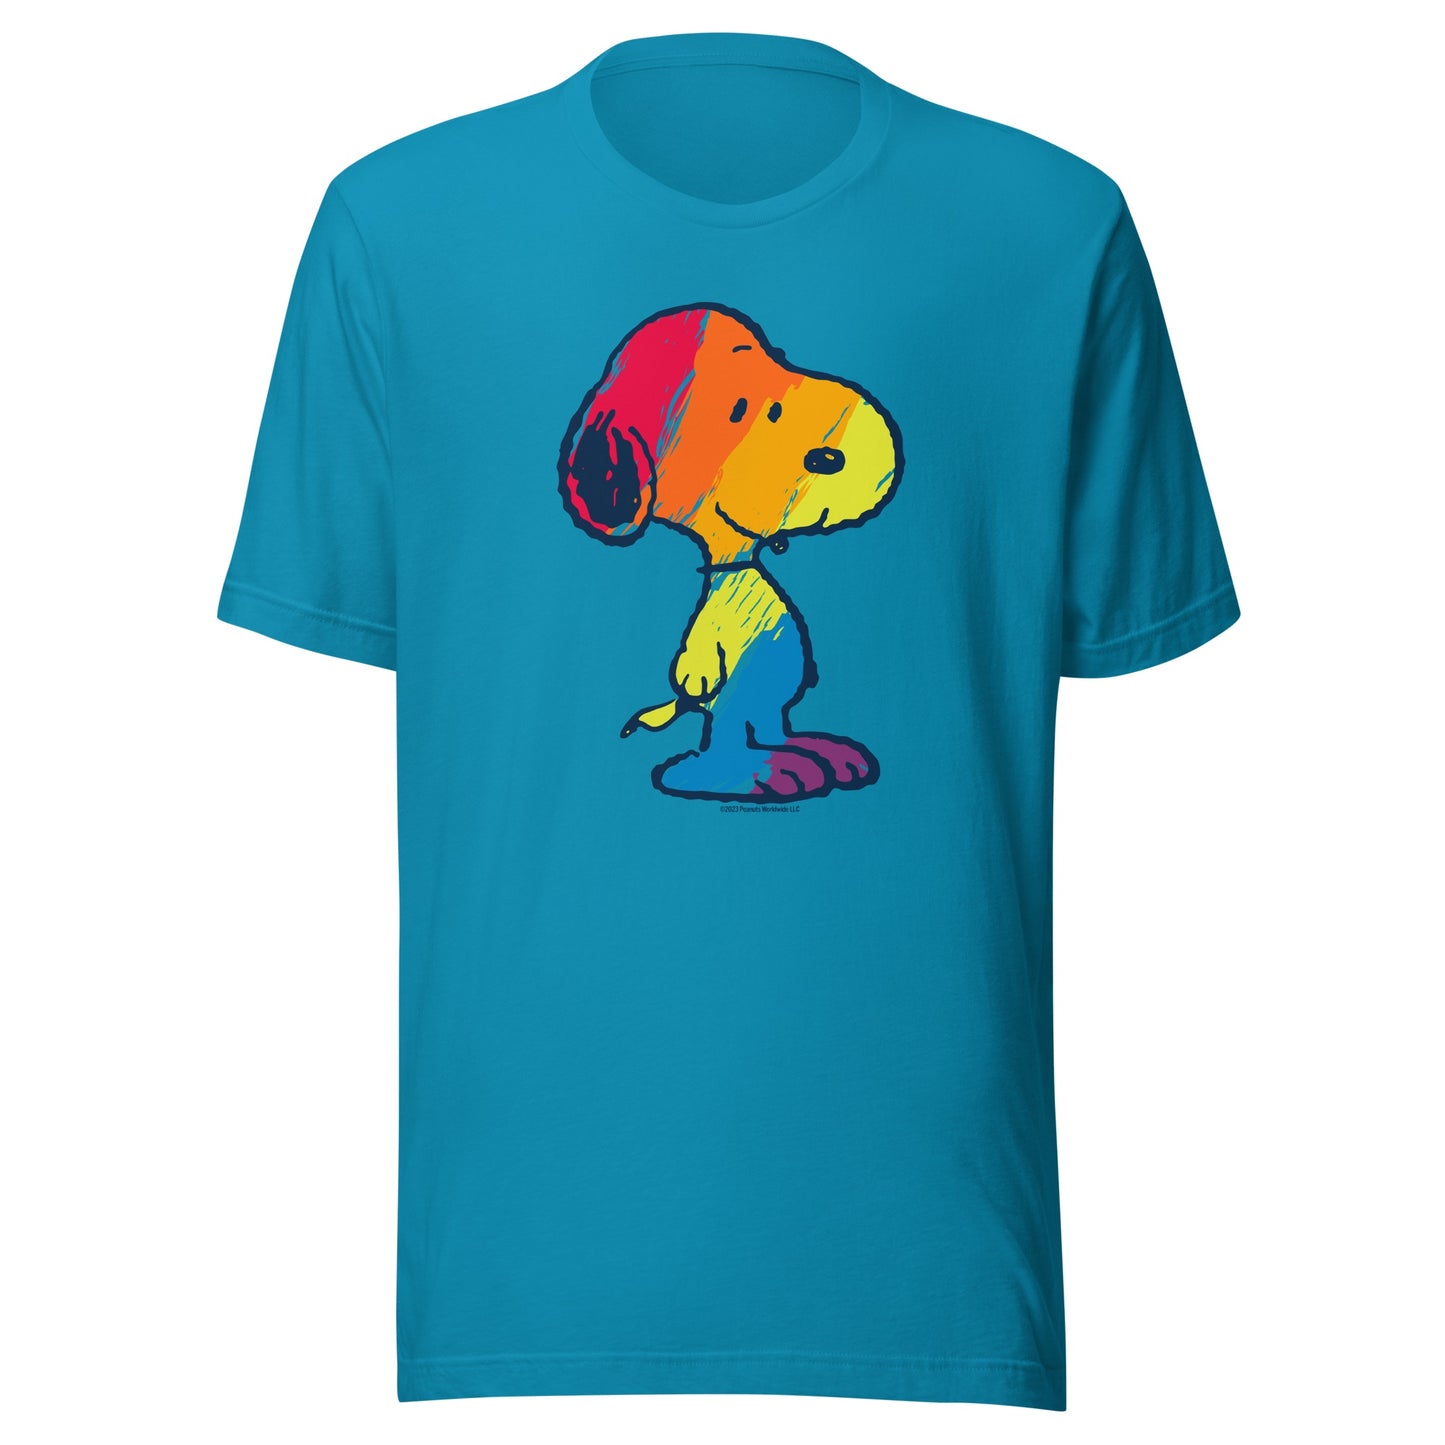 Snoopy Rainbow Colored Adult T-Shirt